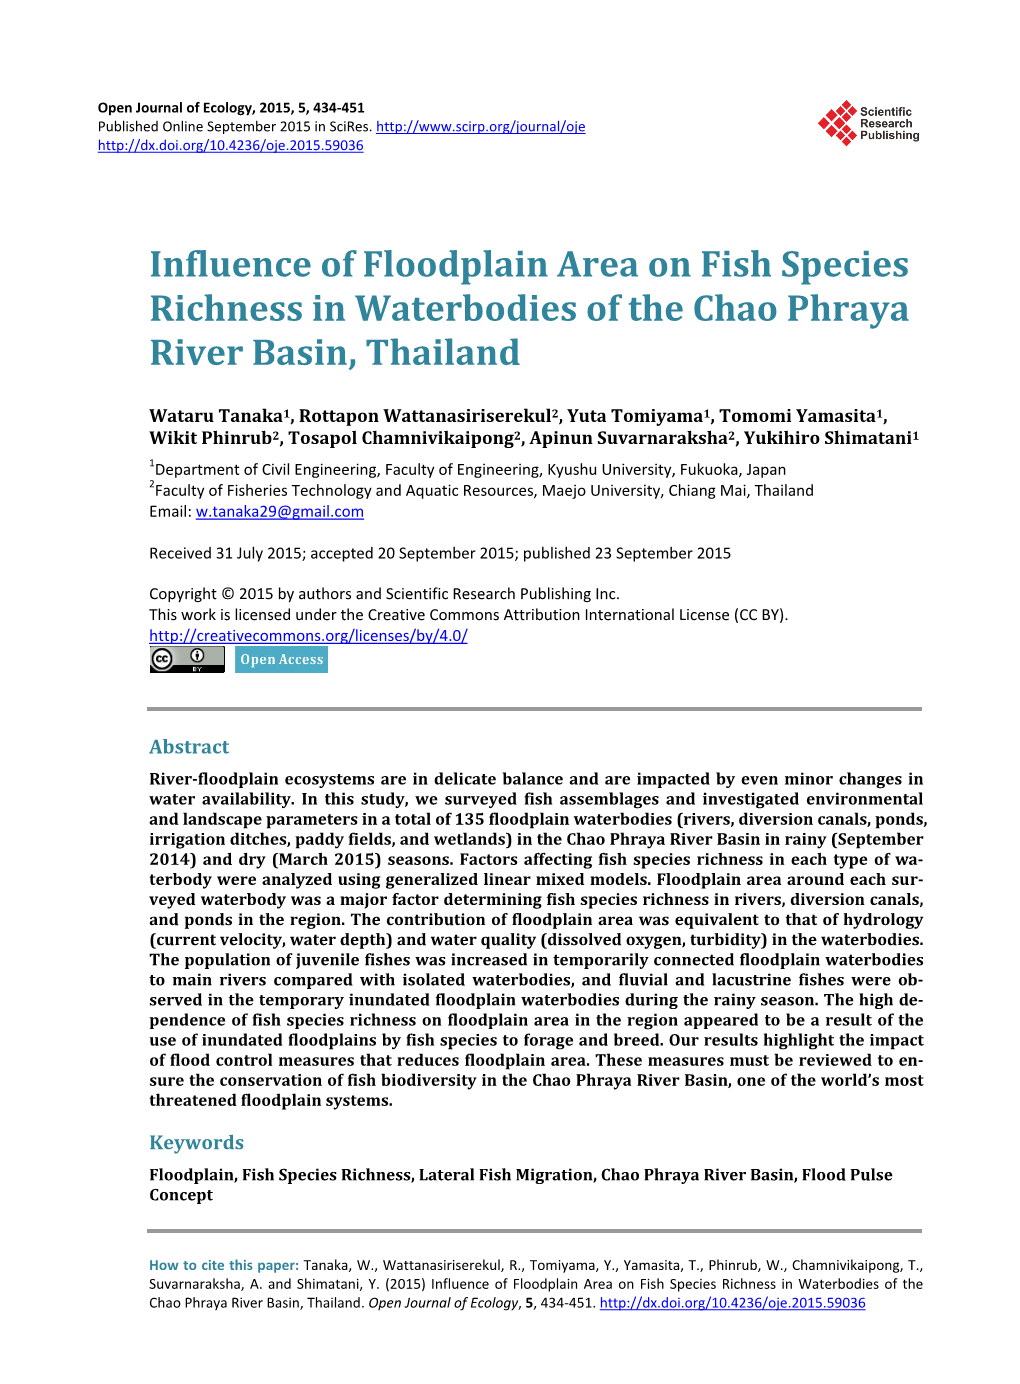 Influence of Floodplain Area on Fish Species Richness in Waterbodies of the Chao Phraya River Basin, Thailand